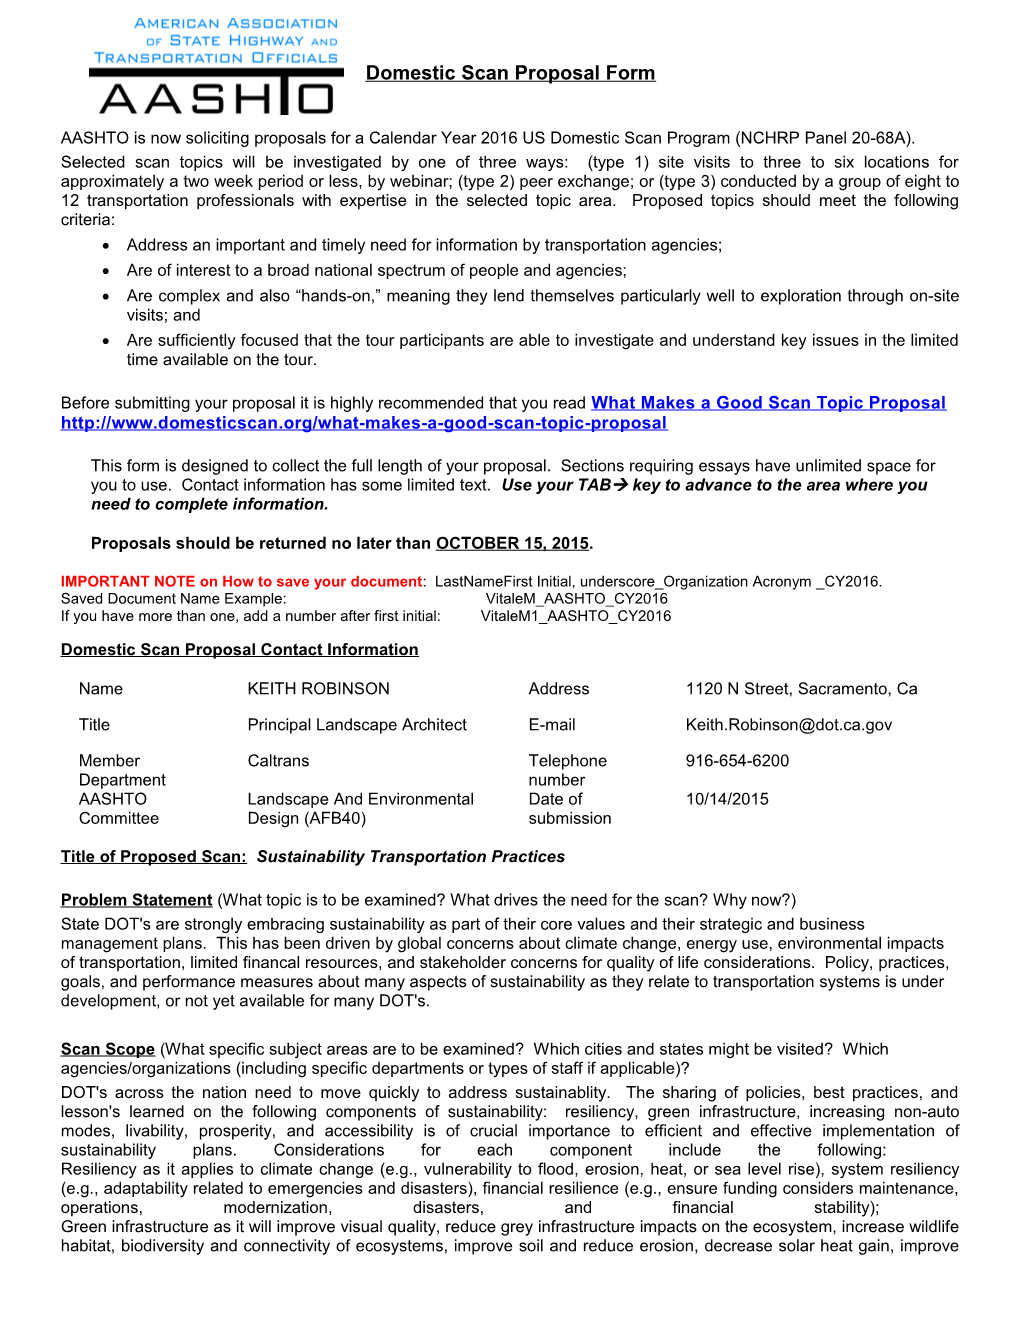 AASHTO Domestic Scan Proposal Form